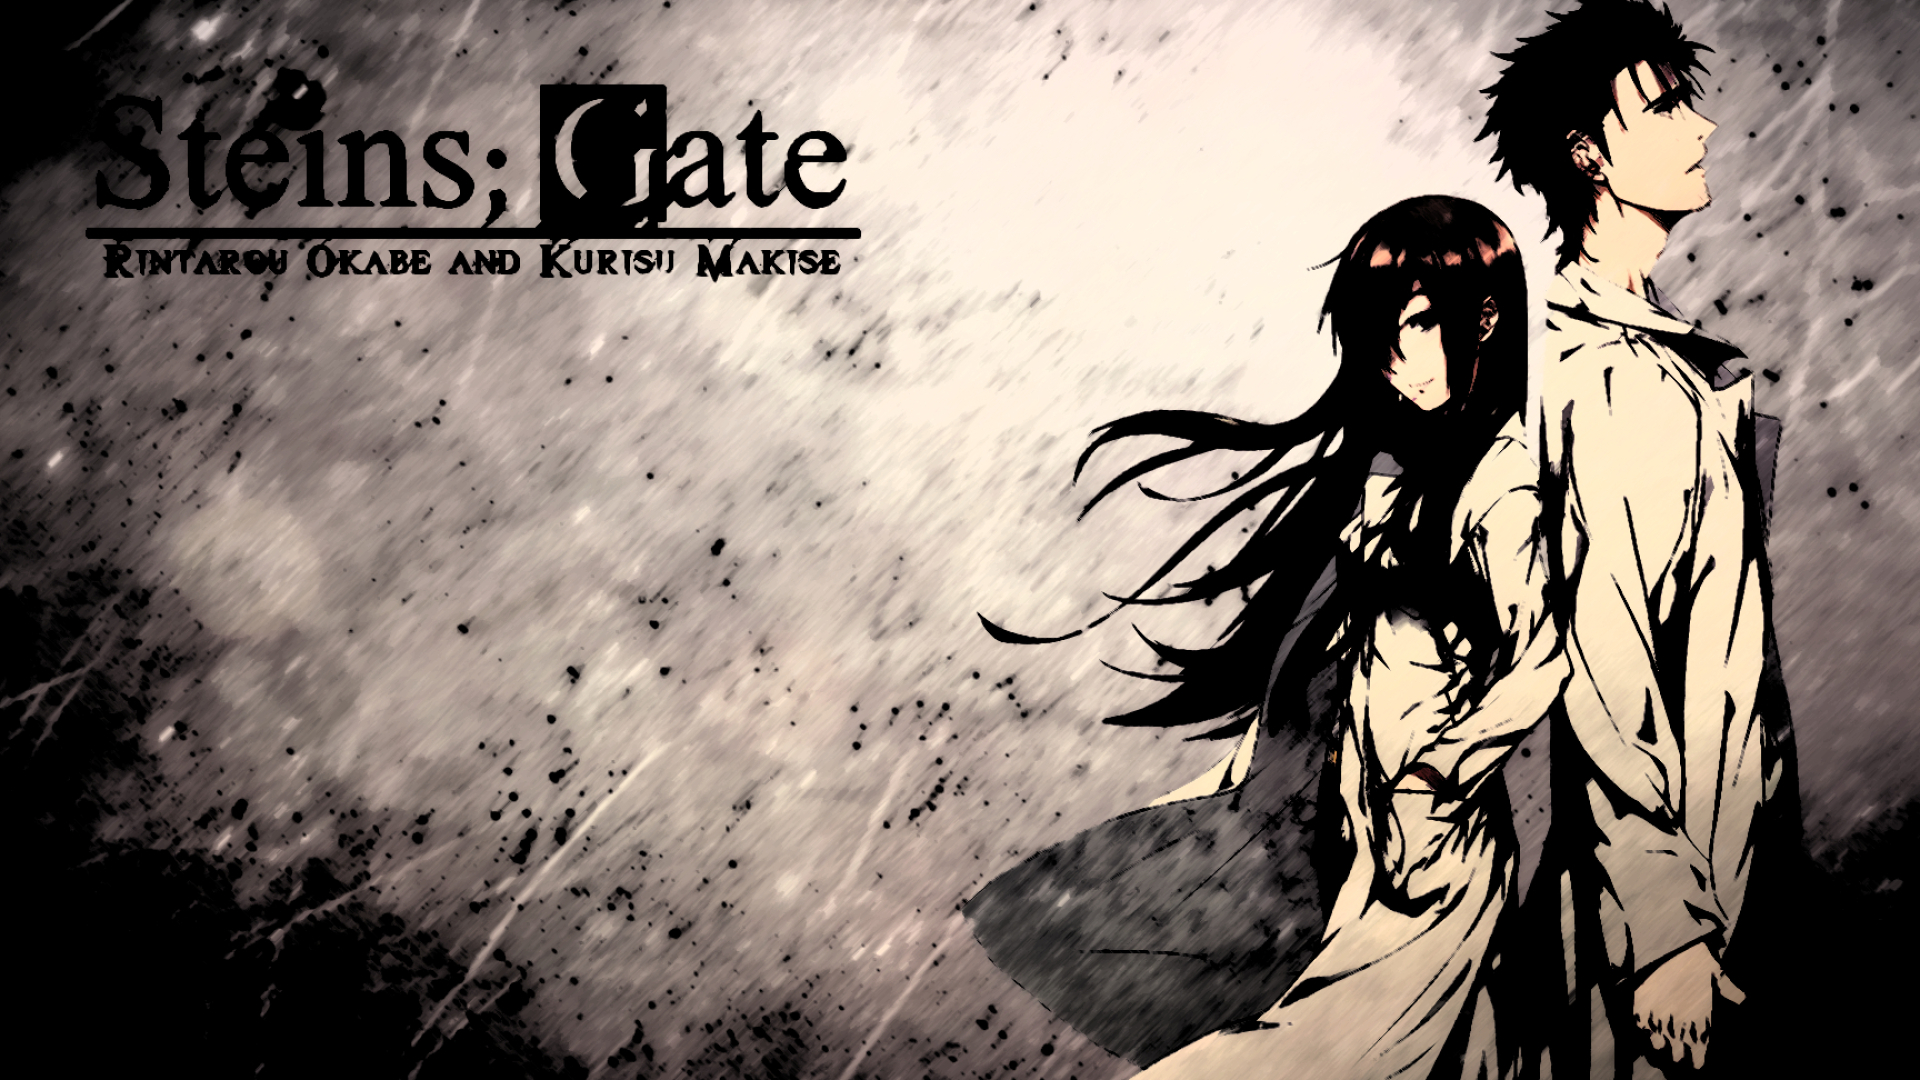 1920x1080 Steins;Gate Wallpapers Top Free Steins;Gate Backgrounds